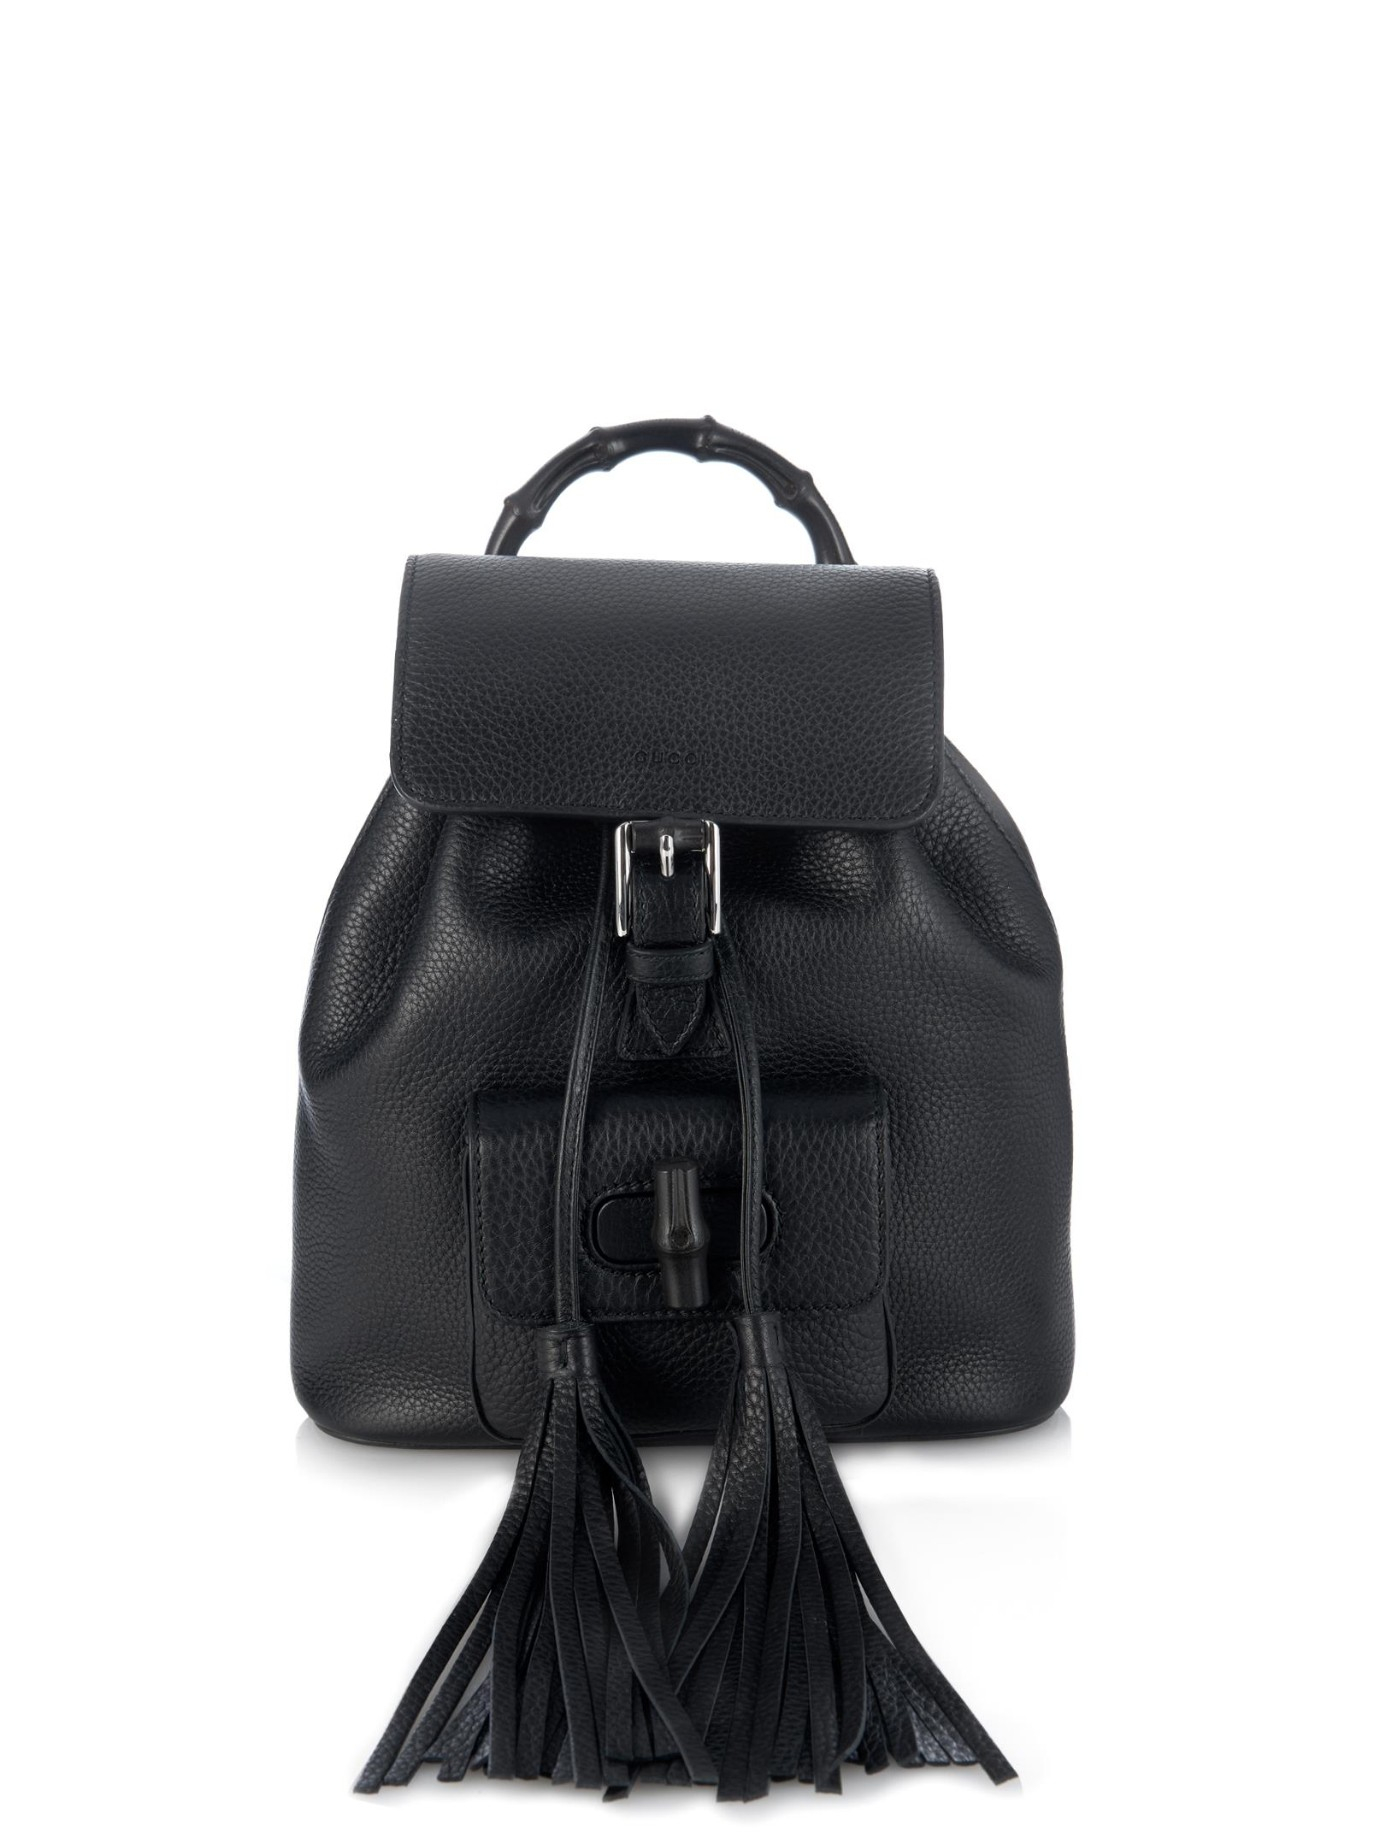 Gucci Bamboo Mini Leather Backpack in Black - Lyst